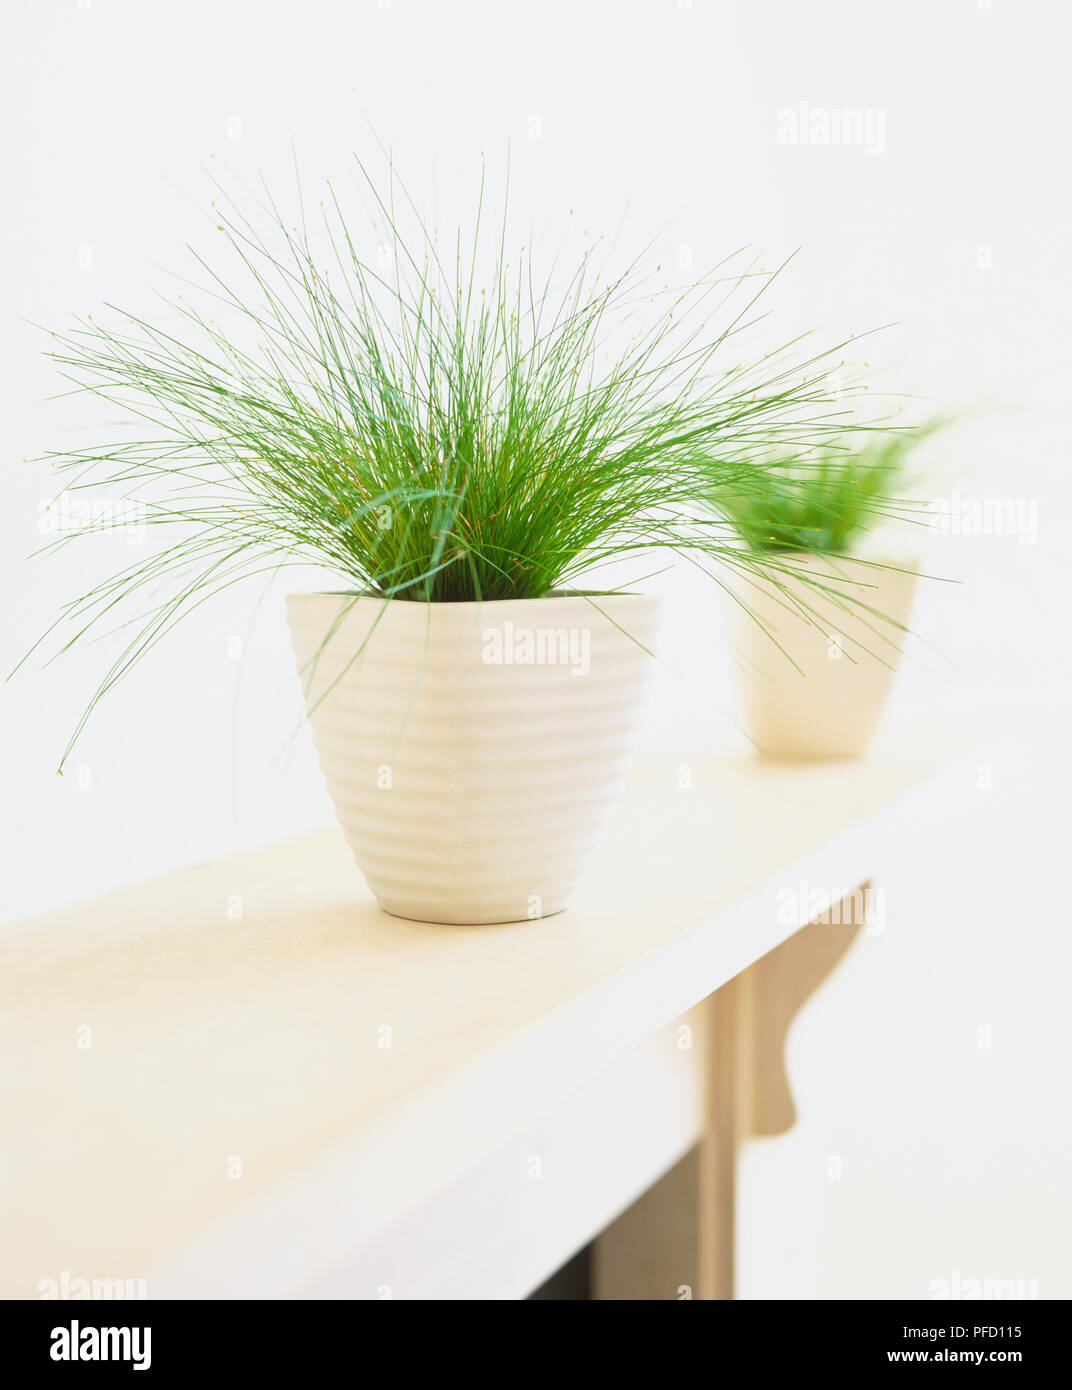 Isolepis cernua, Slender Club-rush plant growing in white ceramic pot on mantlepiece, side view. Stock Photo